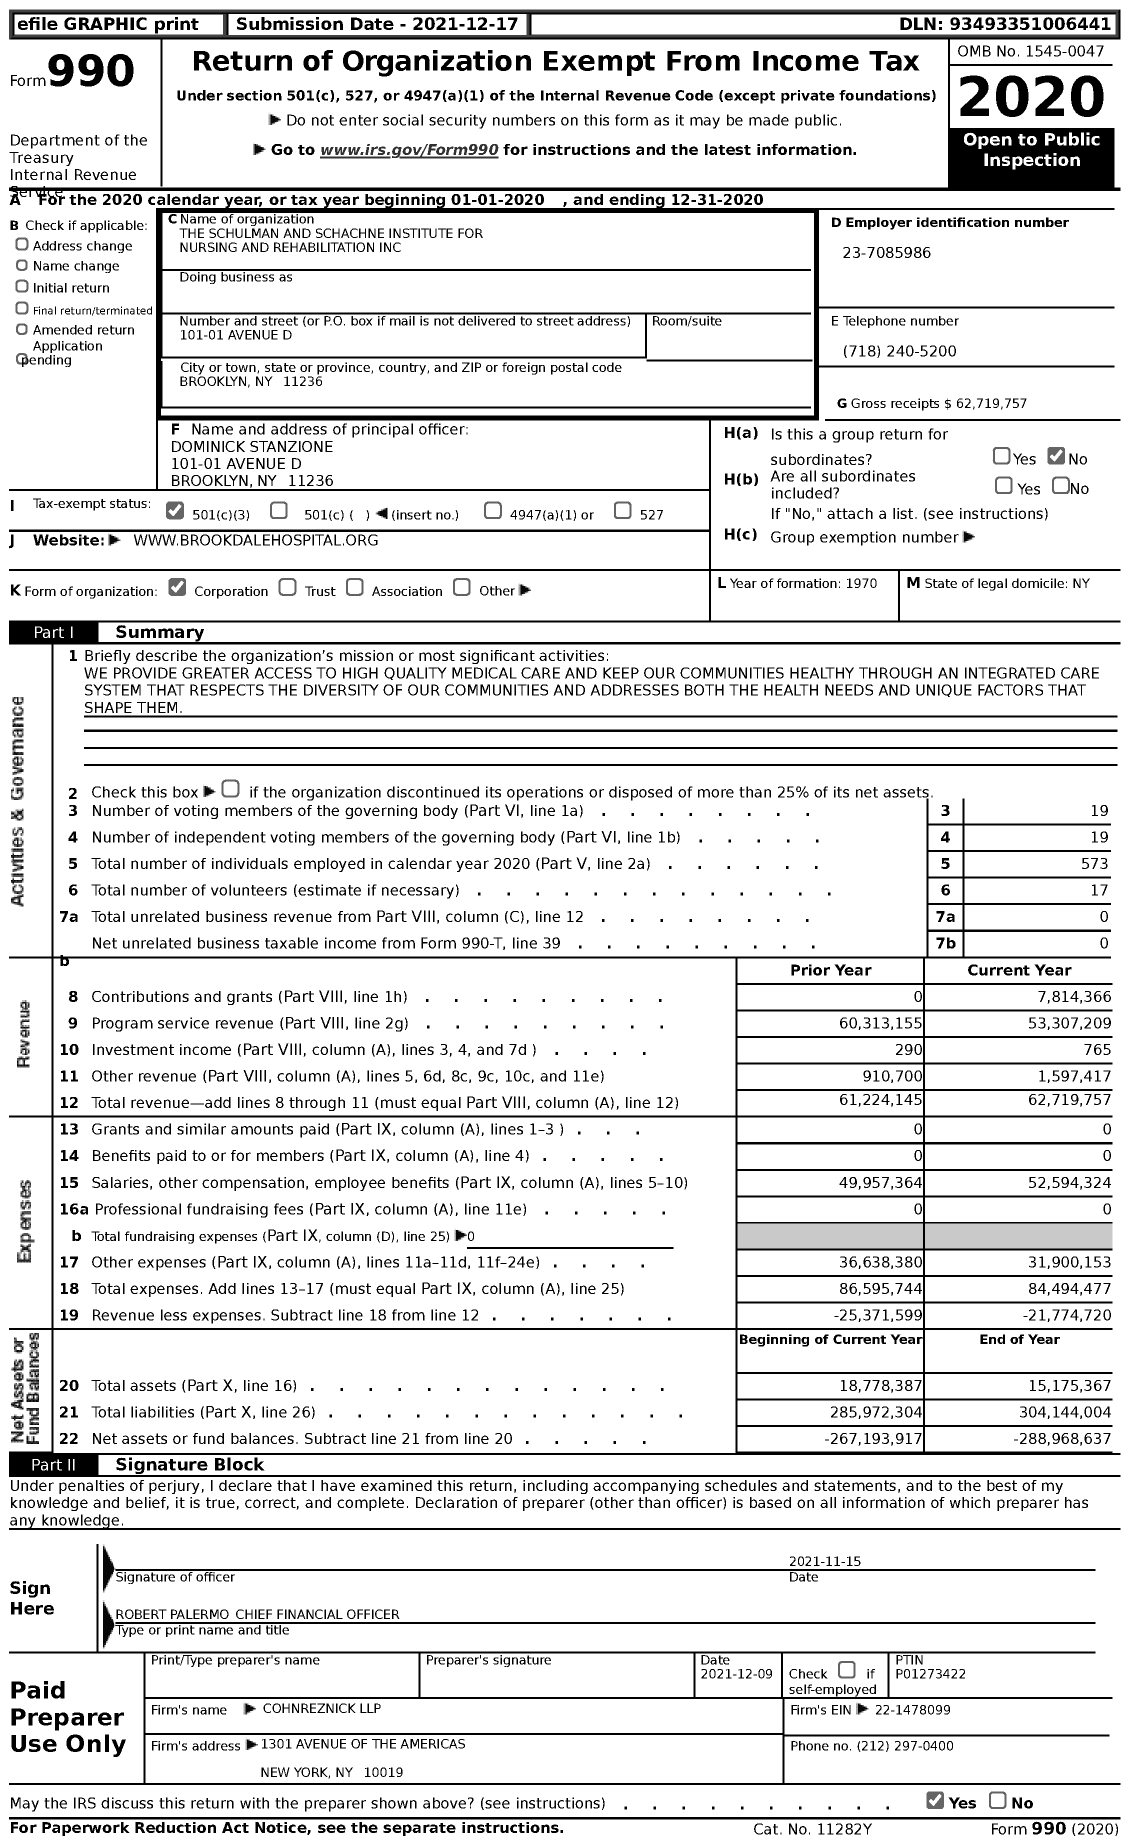 Image of first page of 2020 Form 990 for The Schulman and Schachne Institute for Nursing and Rehabilitation